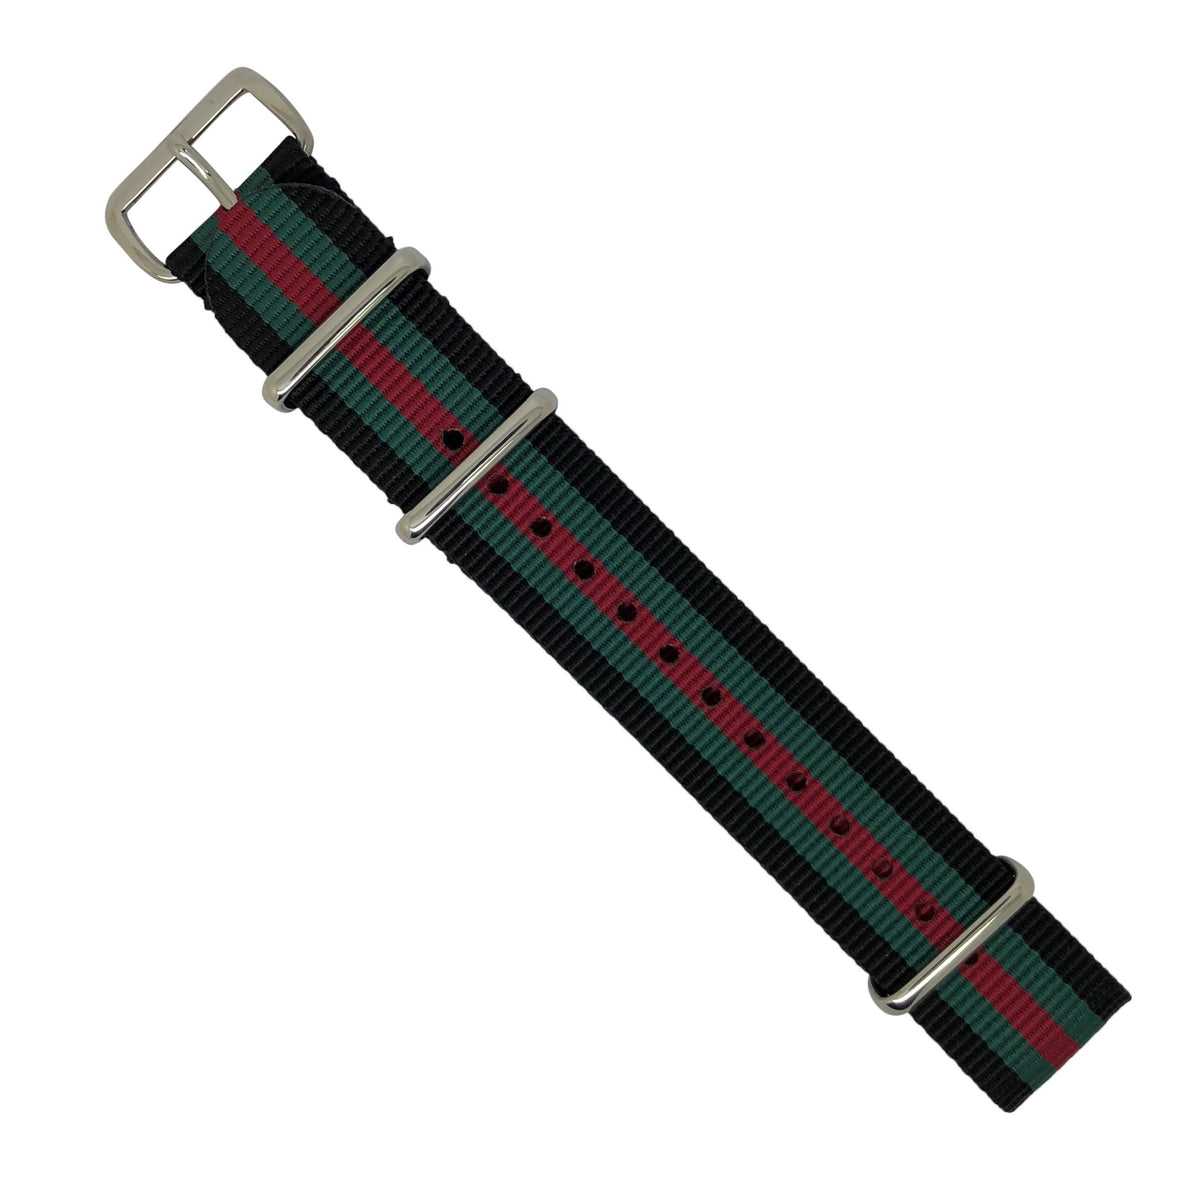 Premium Nato Strap in Black Green Red with Polished Silver Buckle (20mm) - Nomadstore Singapore